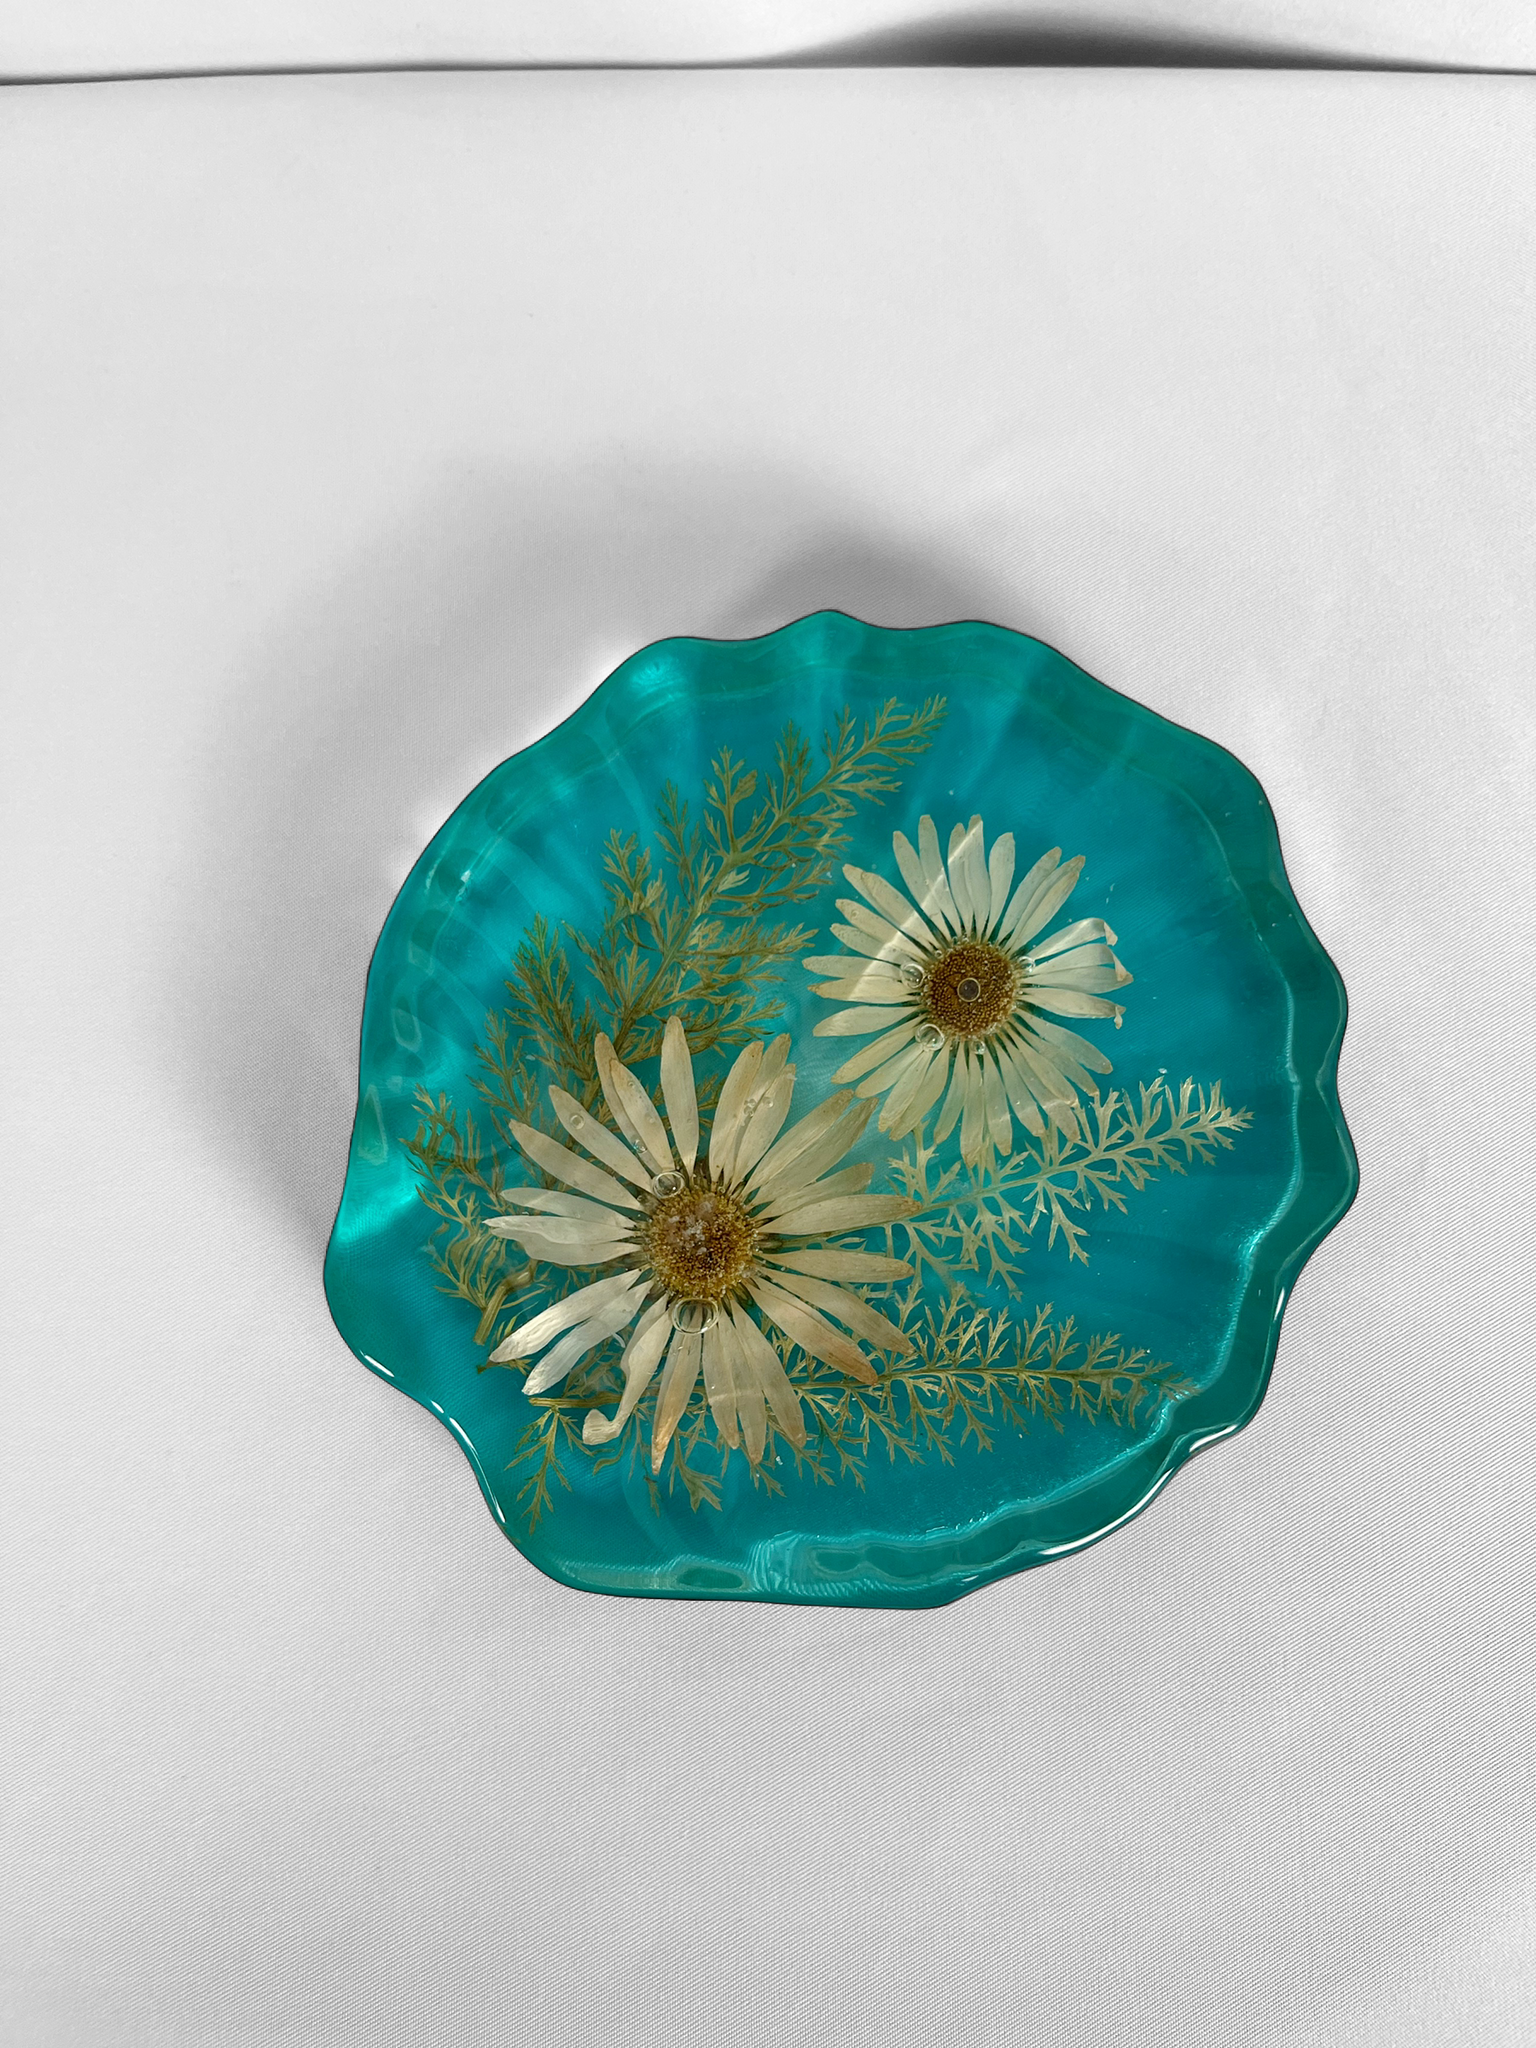 Vintage Resin Shell-Shaped Dish with Pressed Flowers